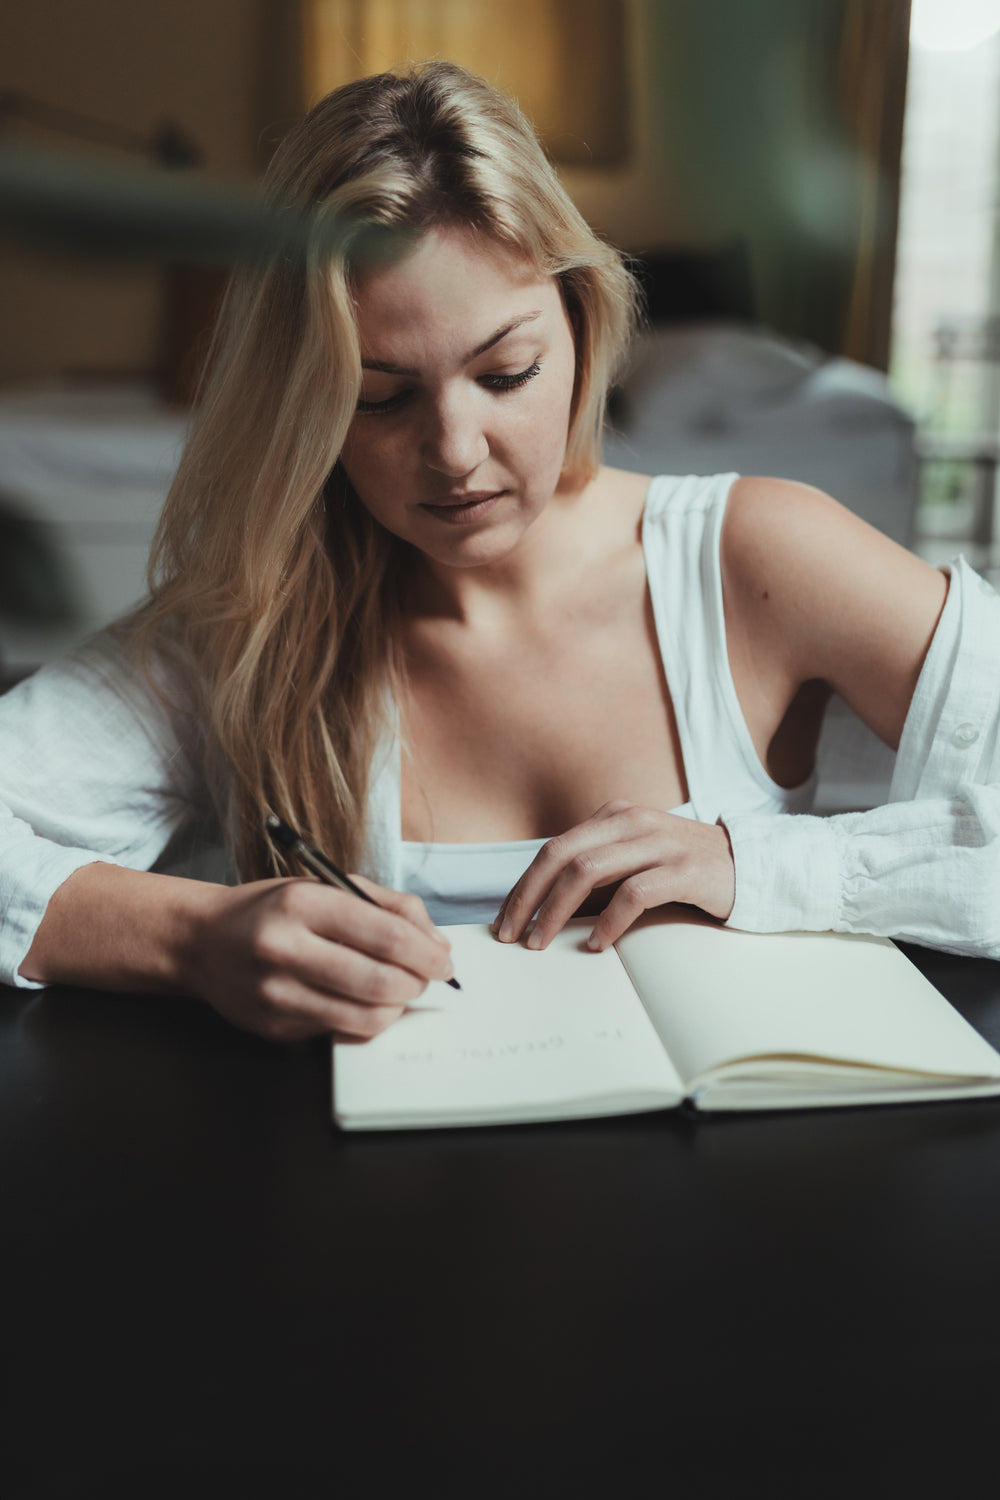 woman writes in a open notebook in her lounge